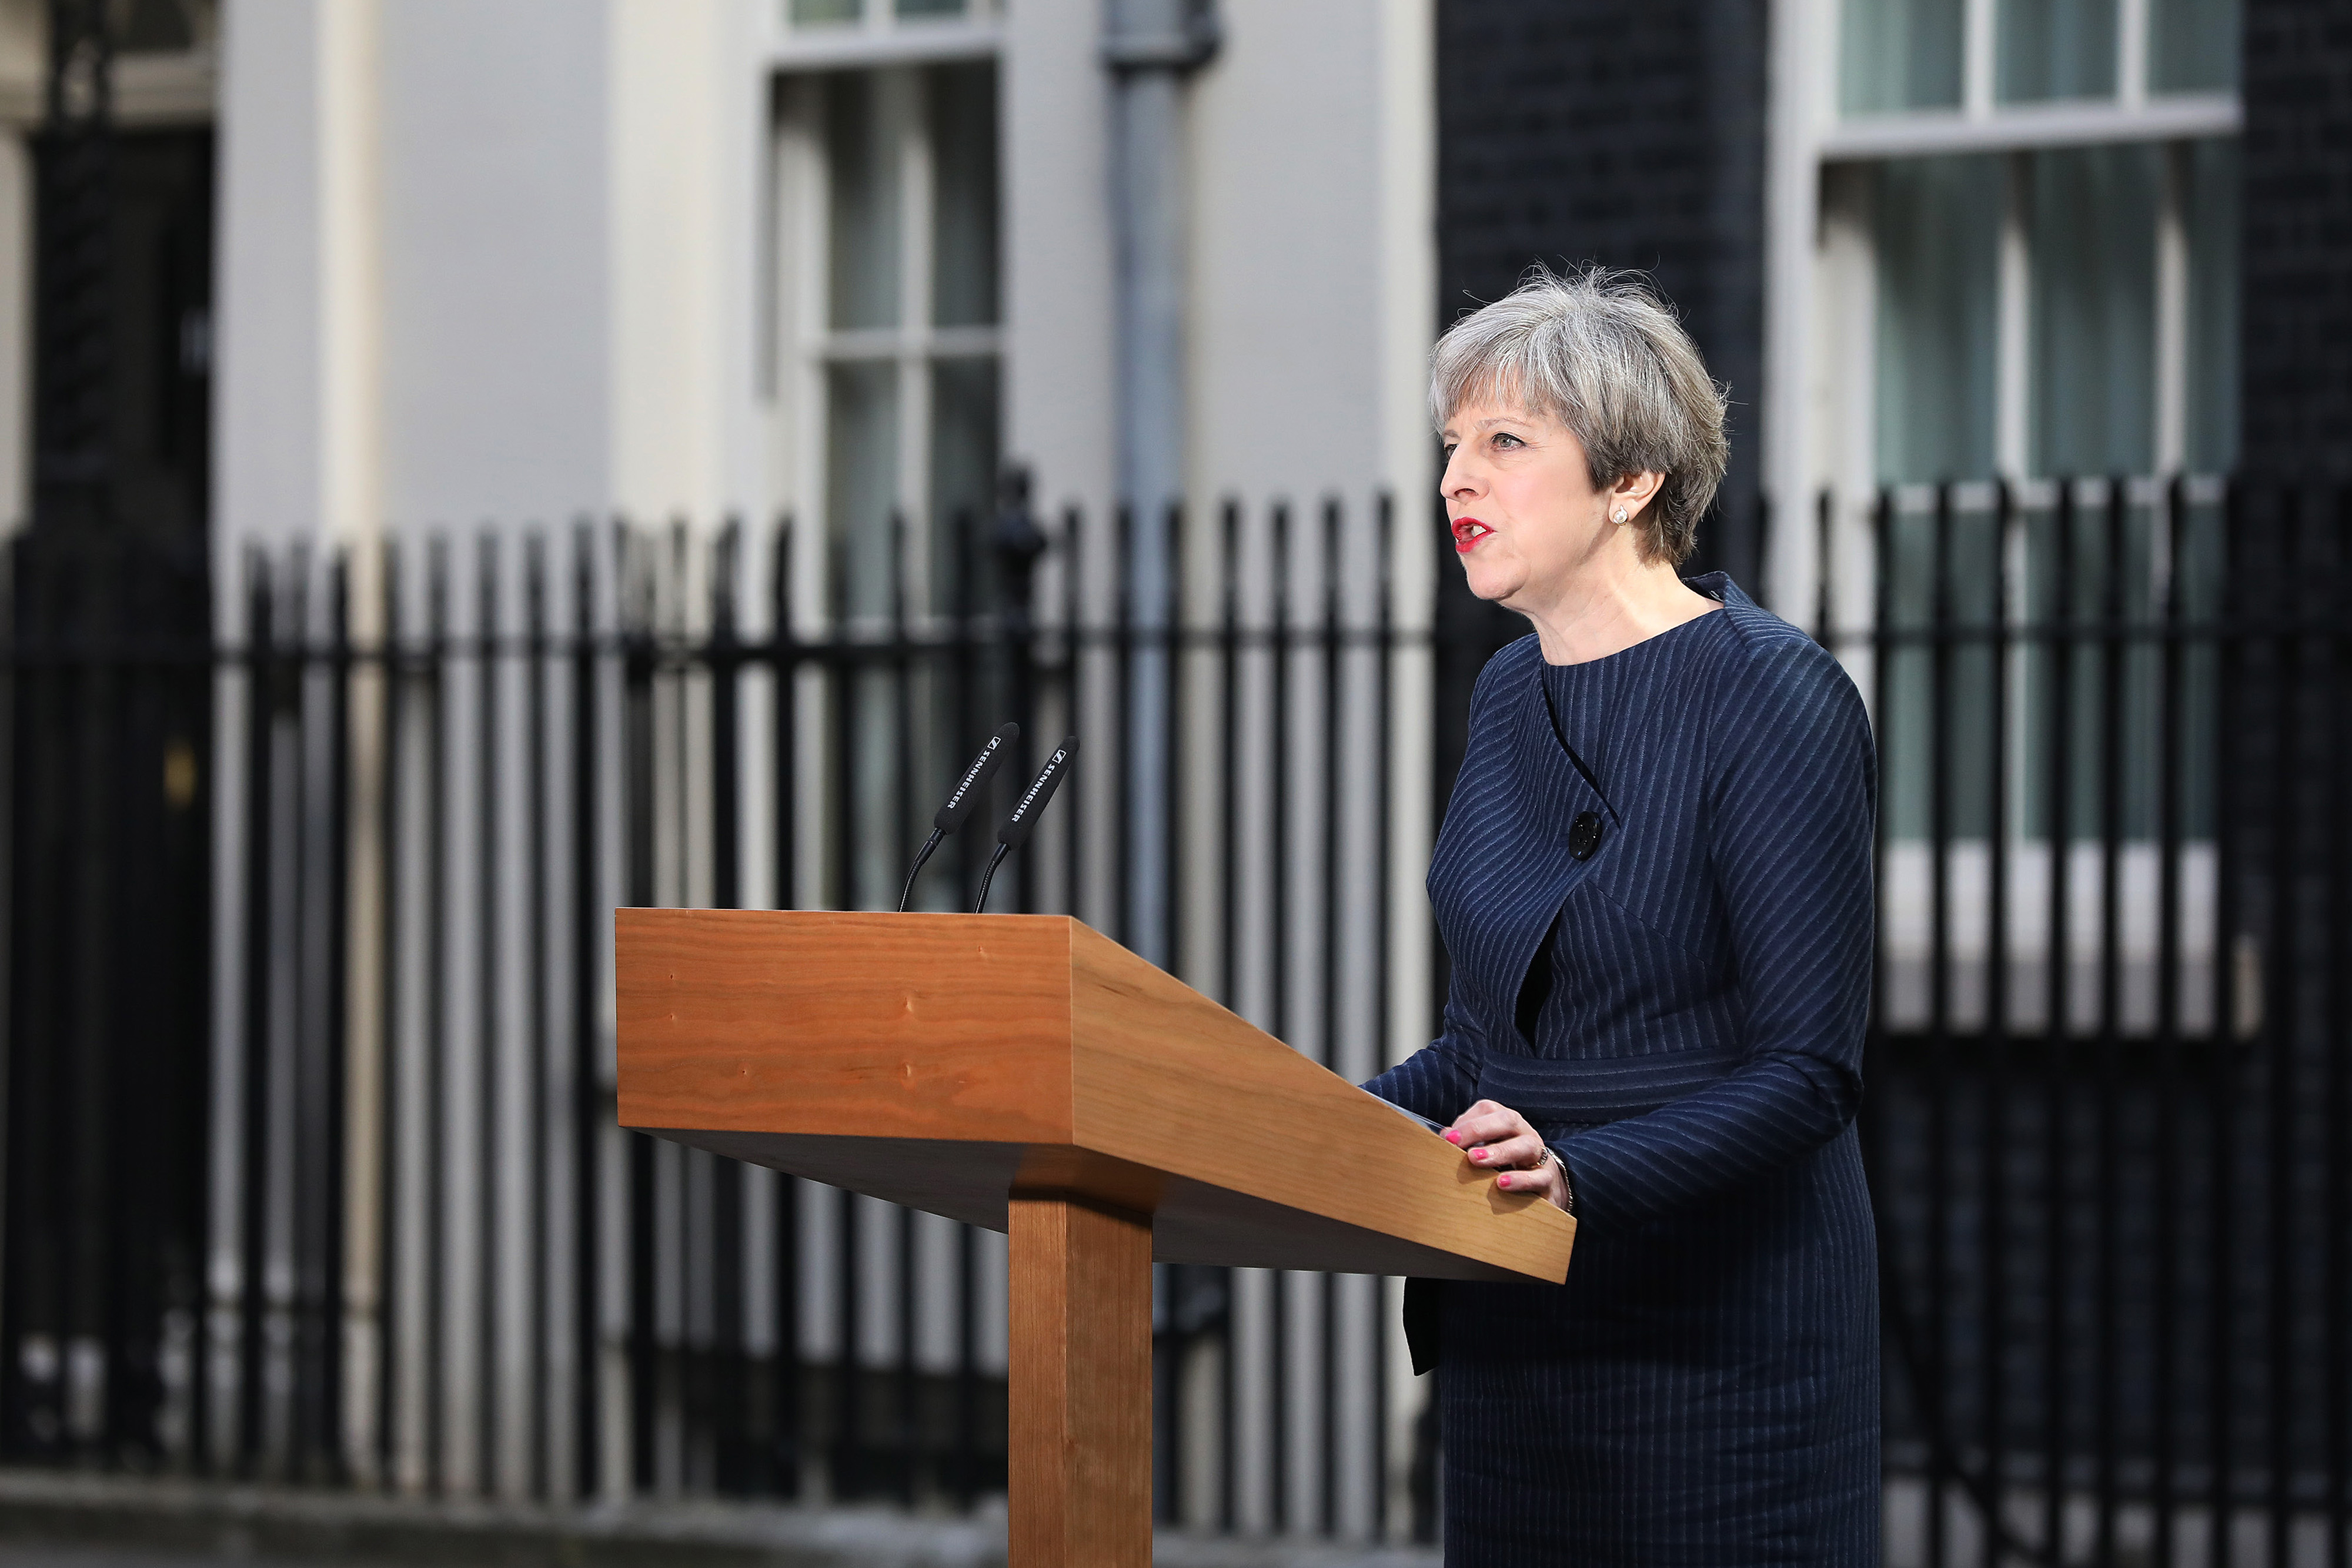 Theresa May, U.K. prime minister, announces a general election outside 10 Downing Street in London, U.K., on Tuesday, April 18, 2017. (Chris Ratcliffe—Bloomberg via Getty Images)